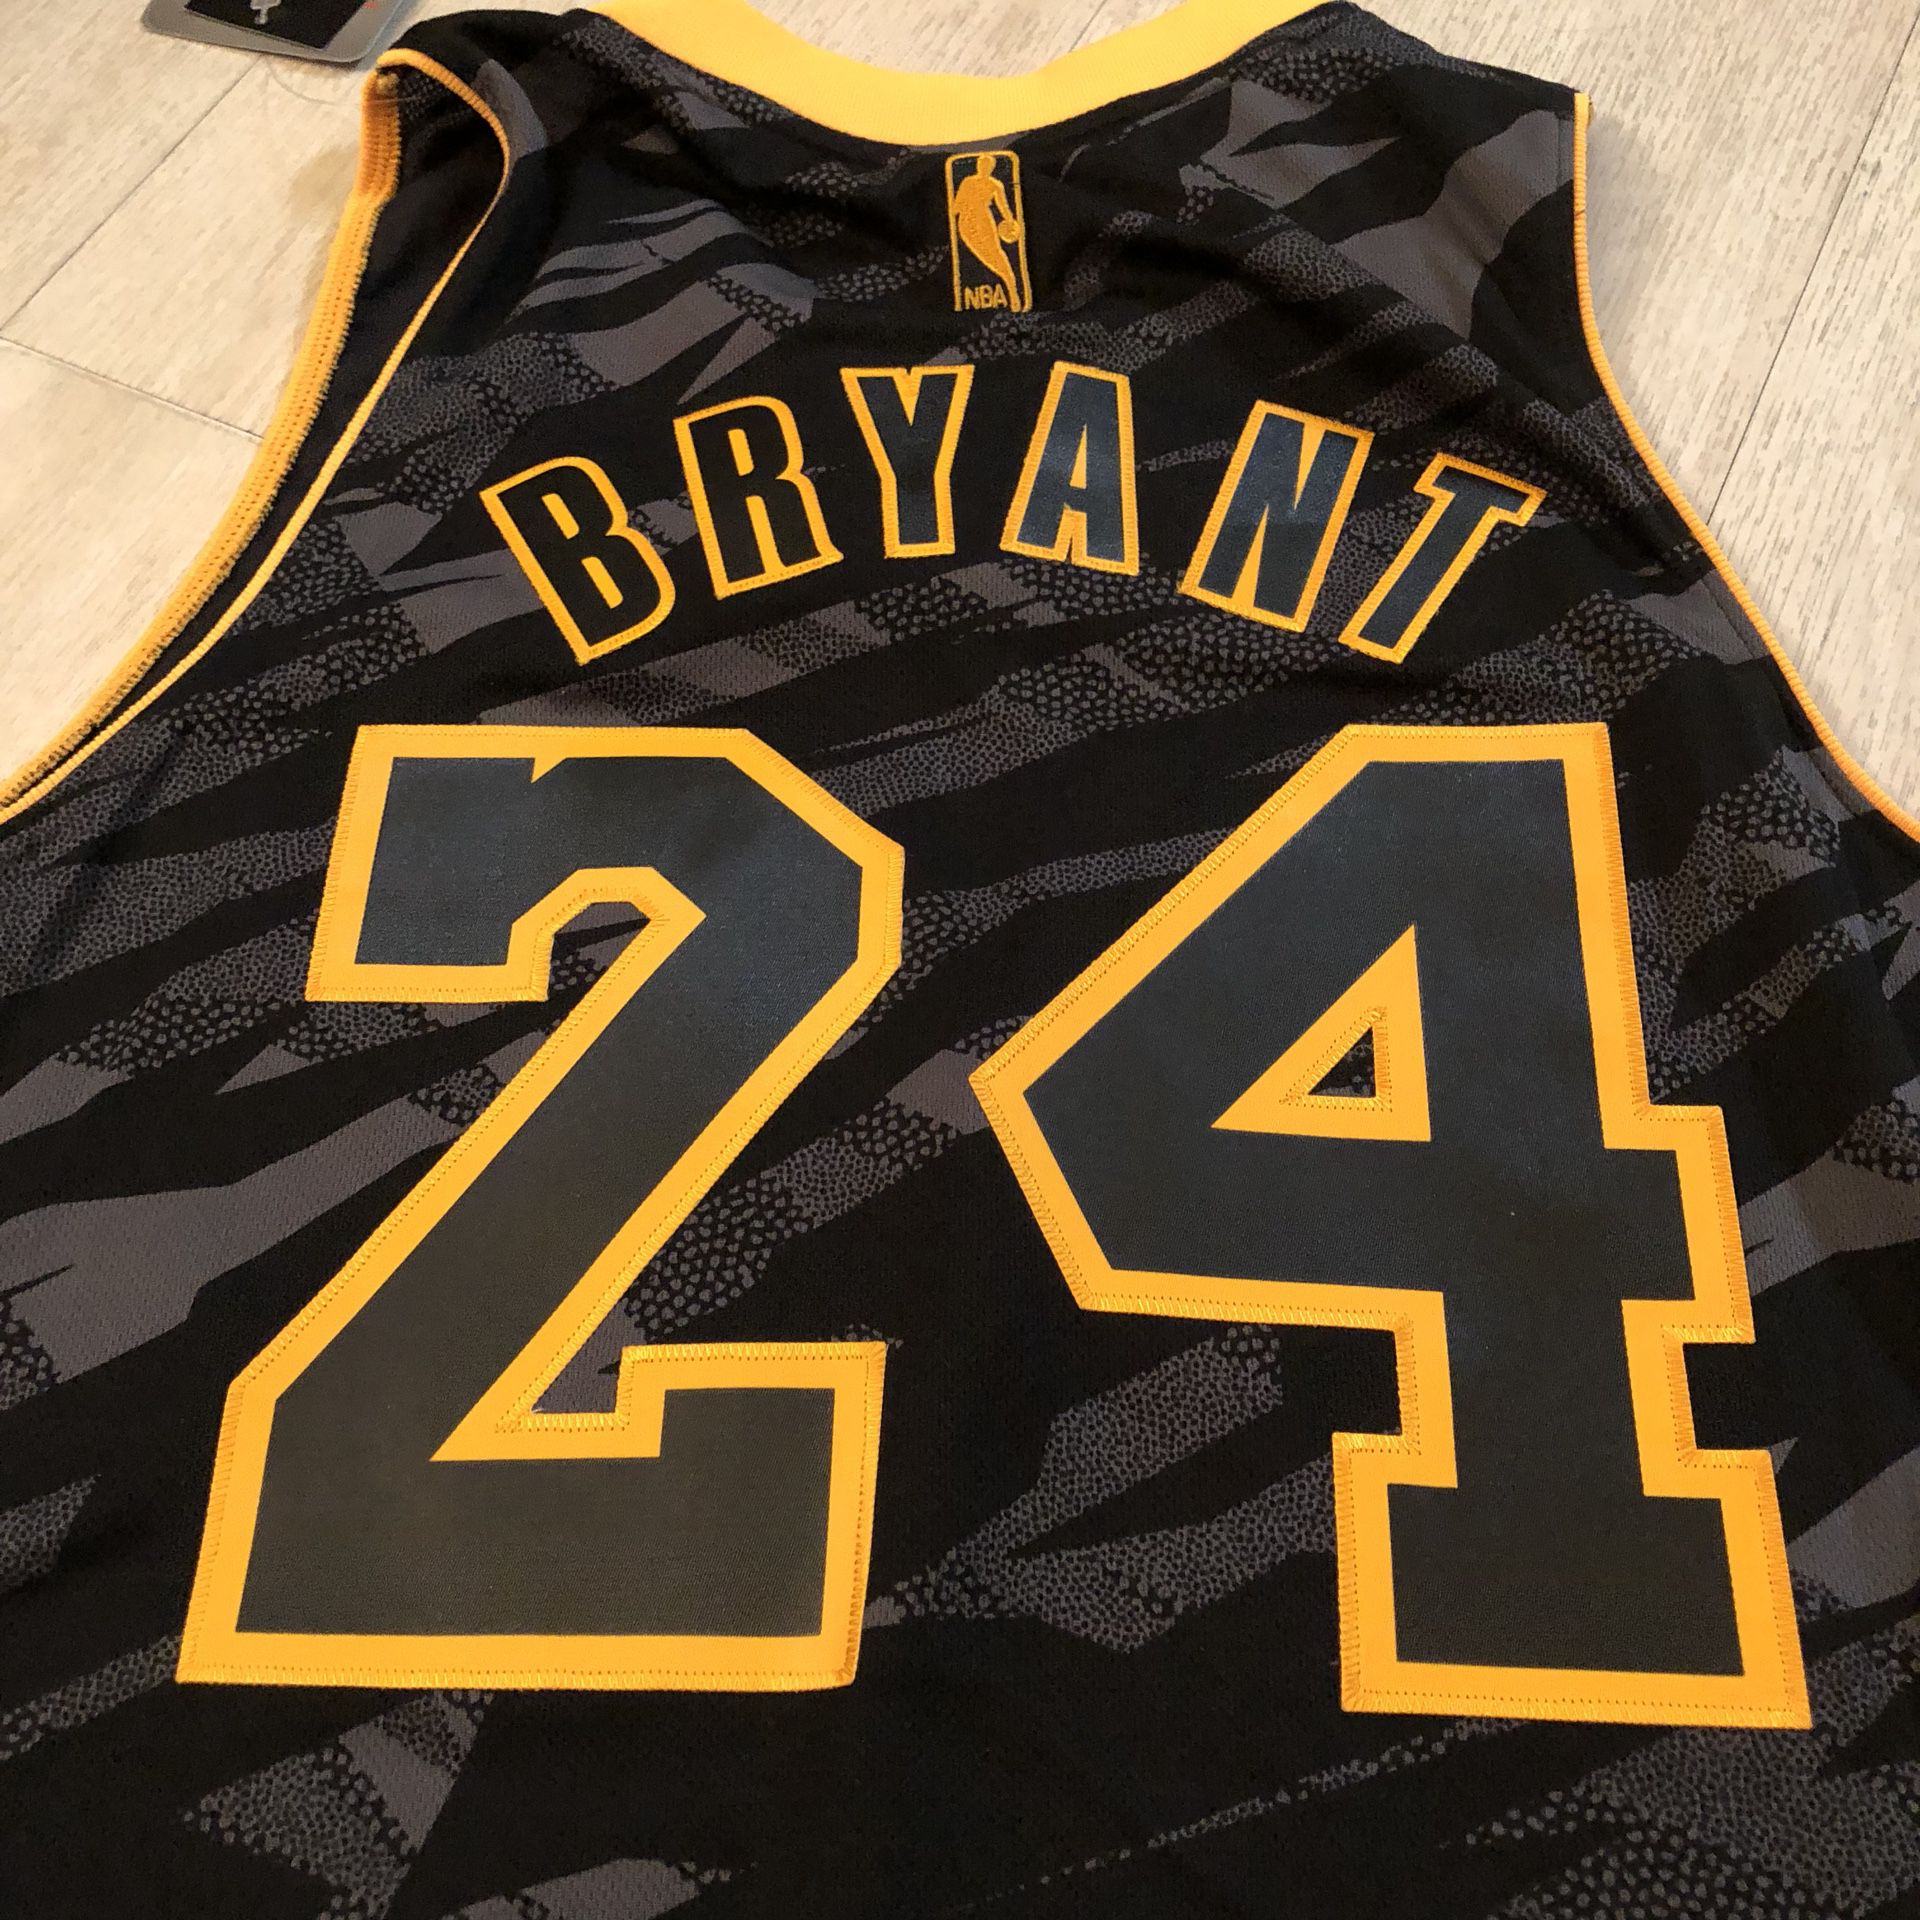 January Adidas Contest Giveaway: Create-a-Cap and Win a Kobe Bryant Jersey!